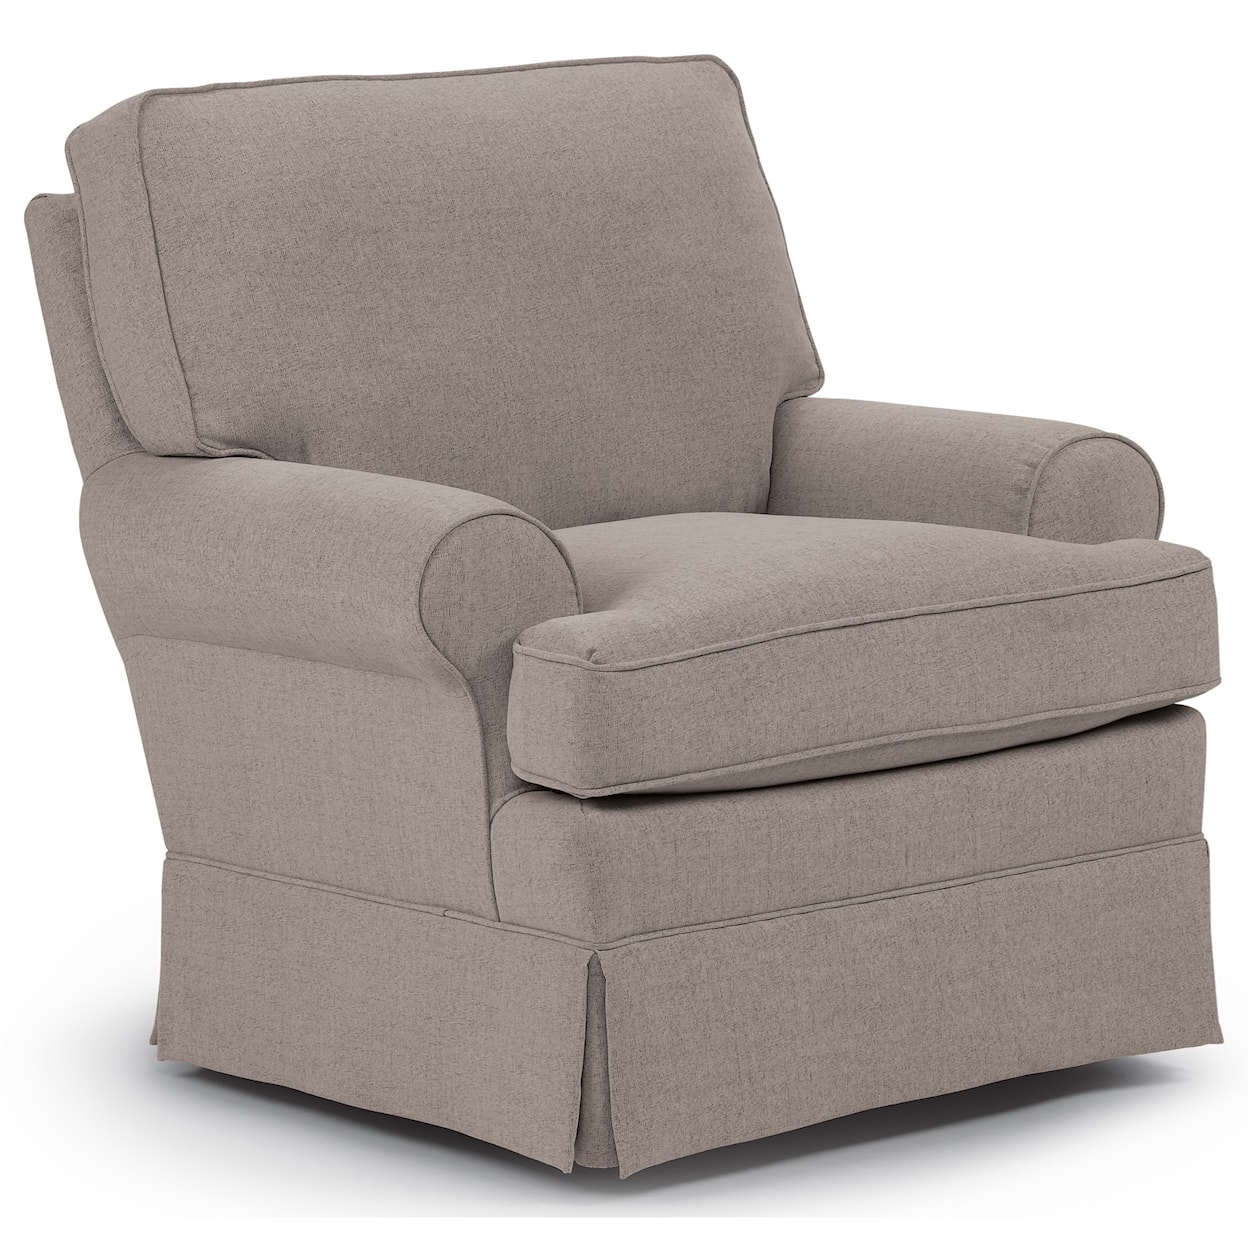 Best Home Furnishings Swivel Glide Chairs Swivel Glider Chair with Welt Cord Trim